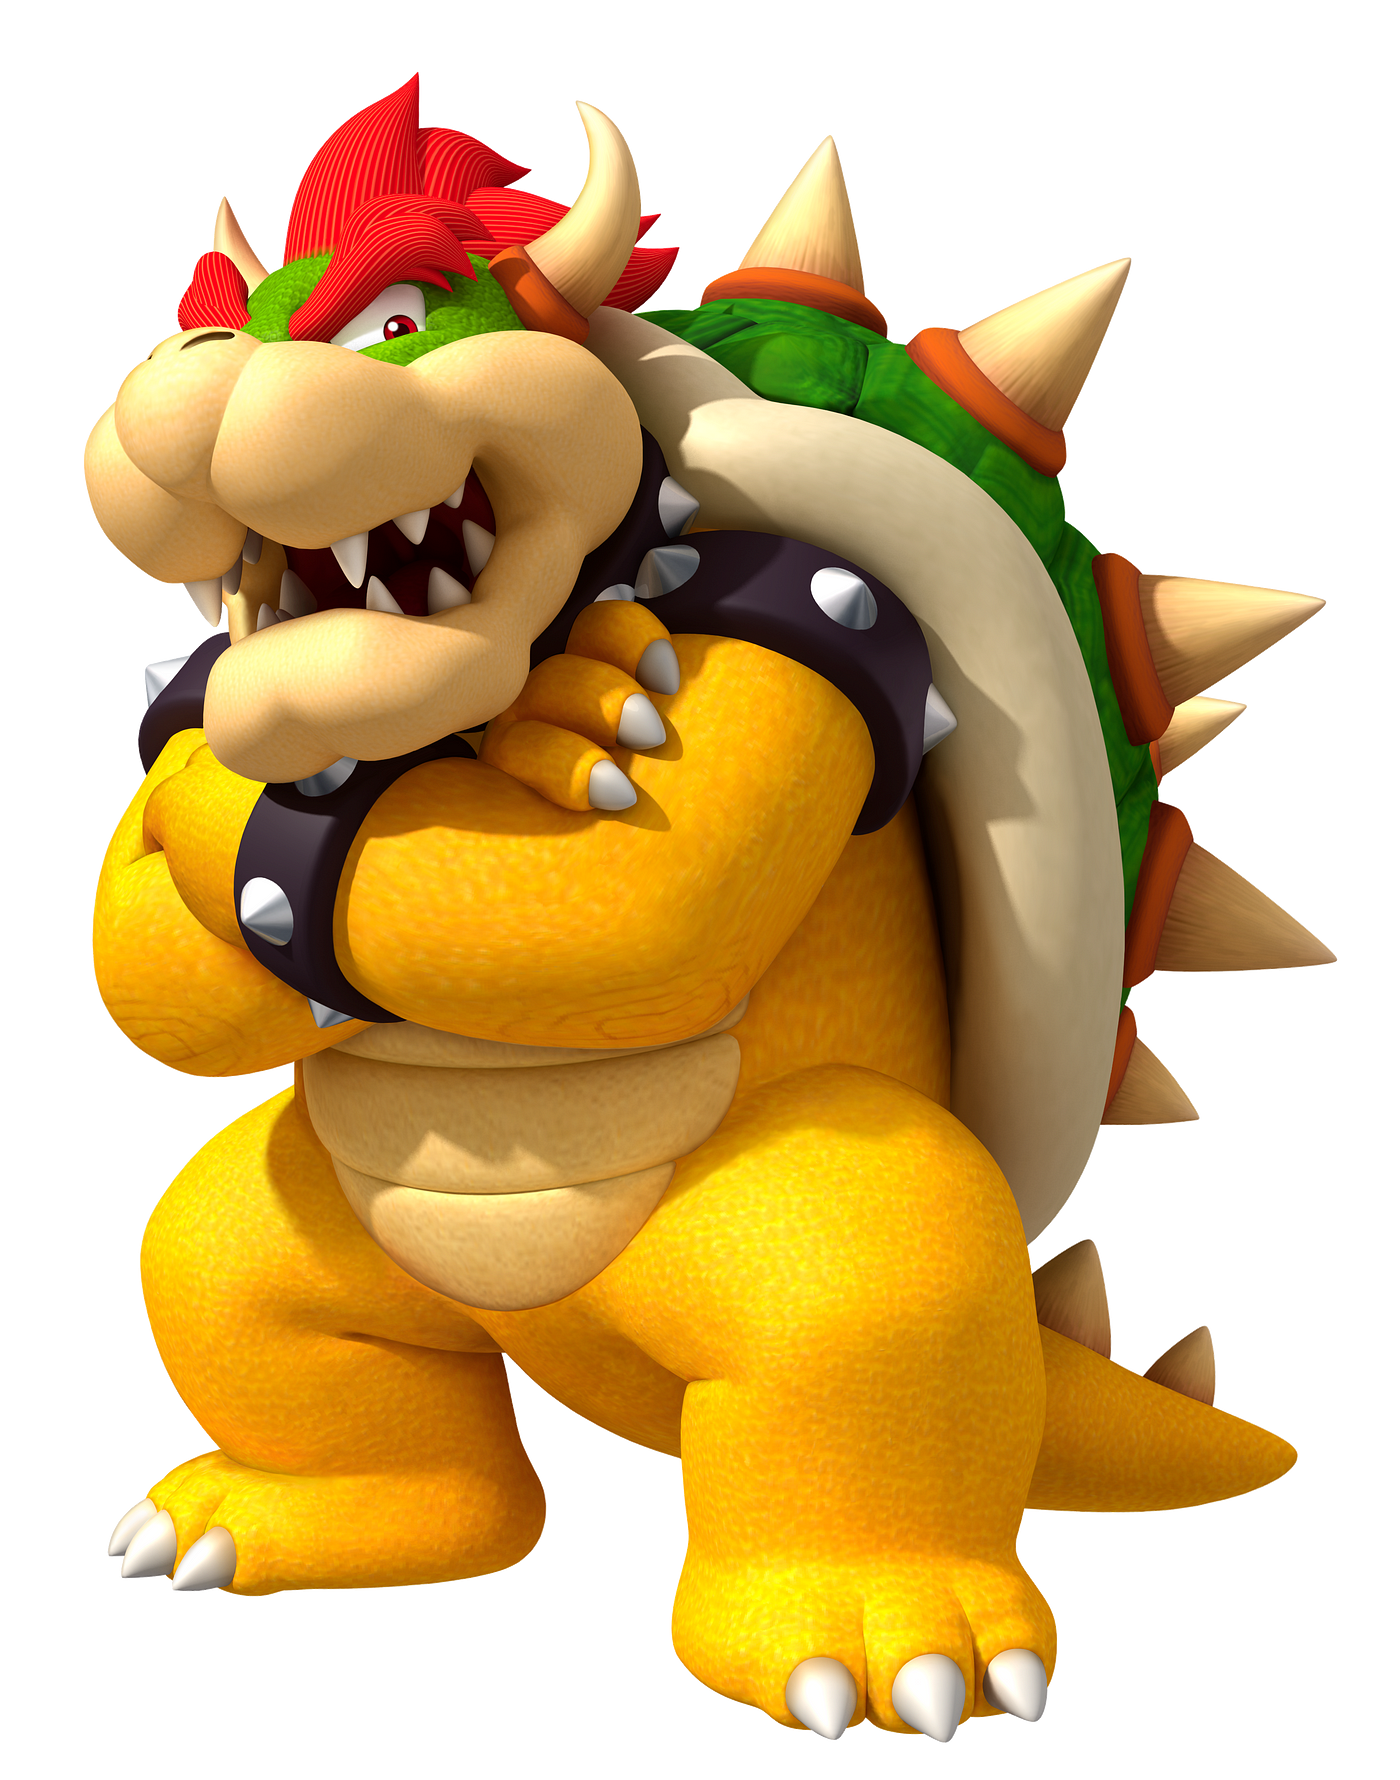 So Long, Gay Bowser”: A queer reading of Super Mario, by Erica Lenti